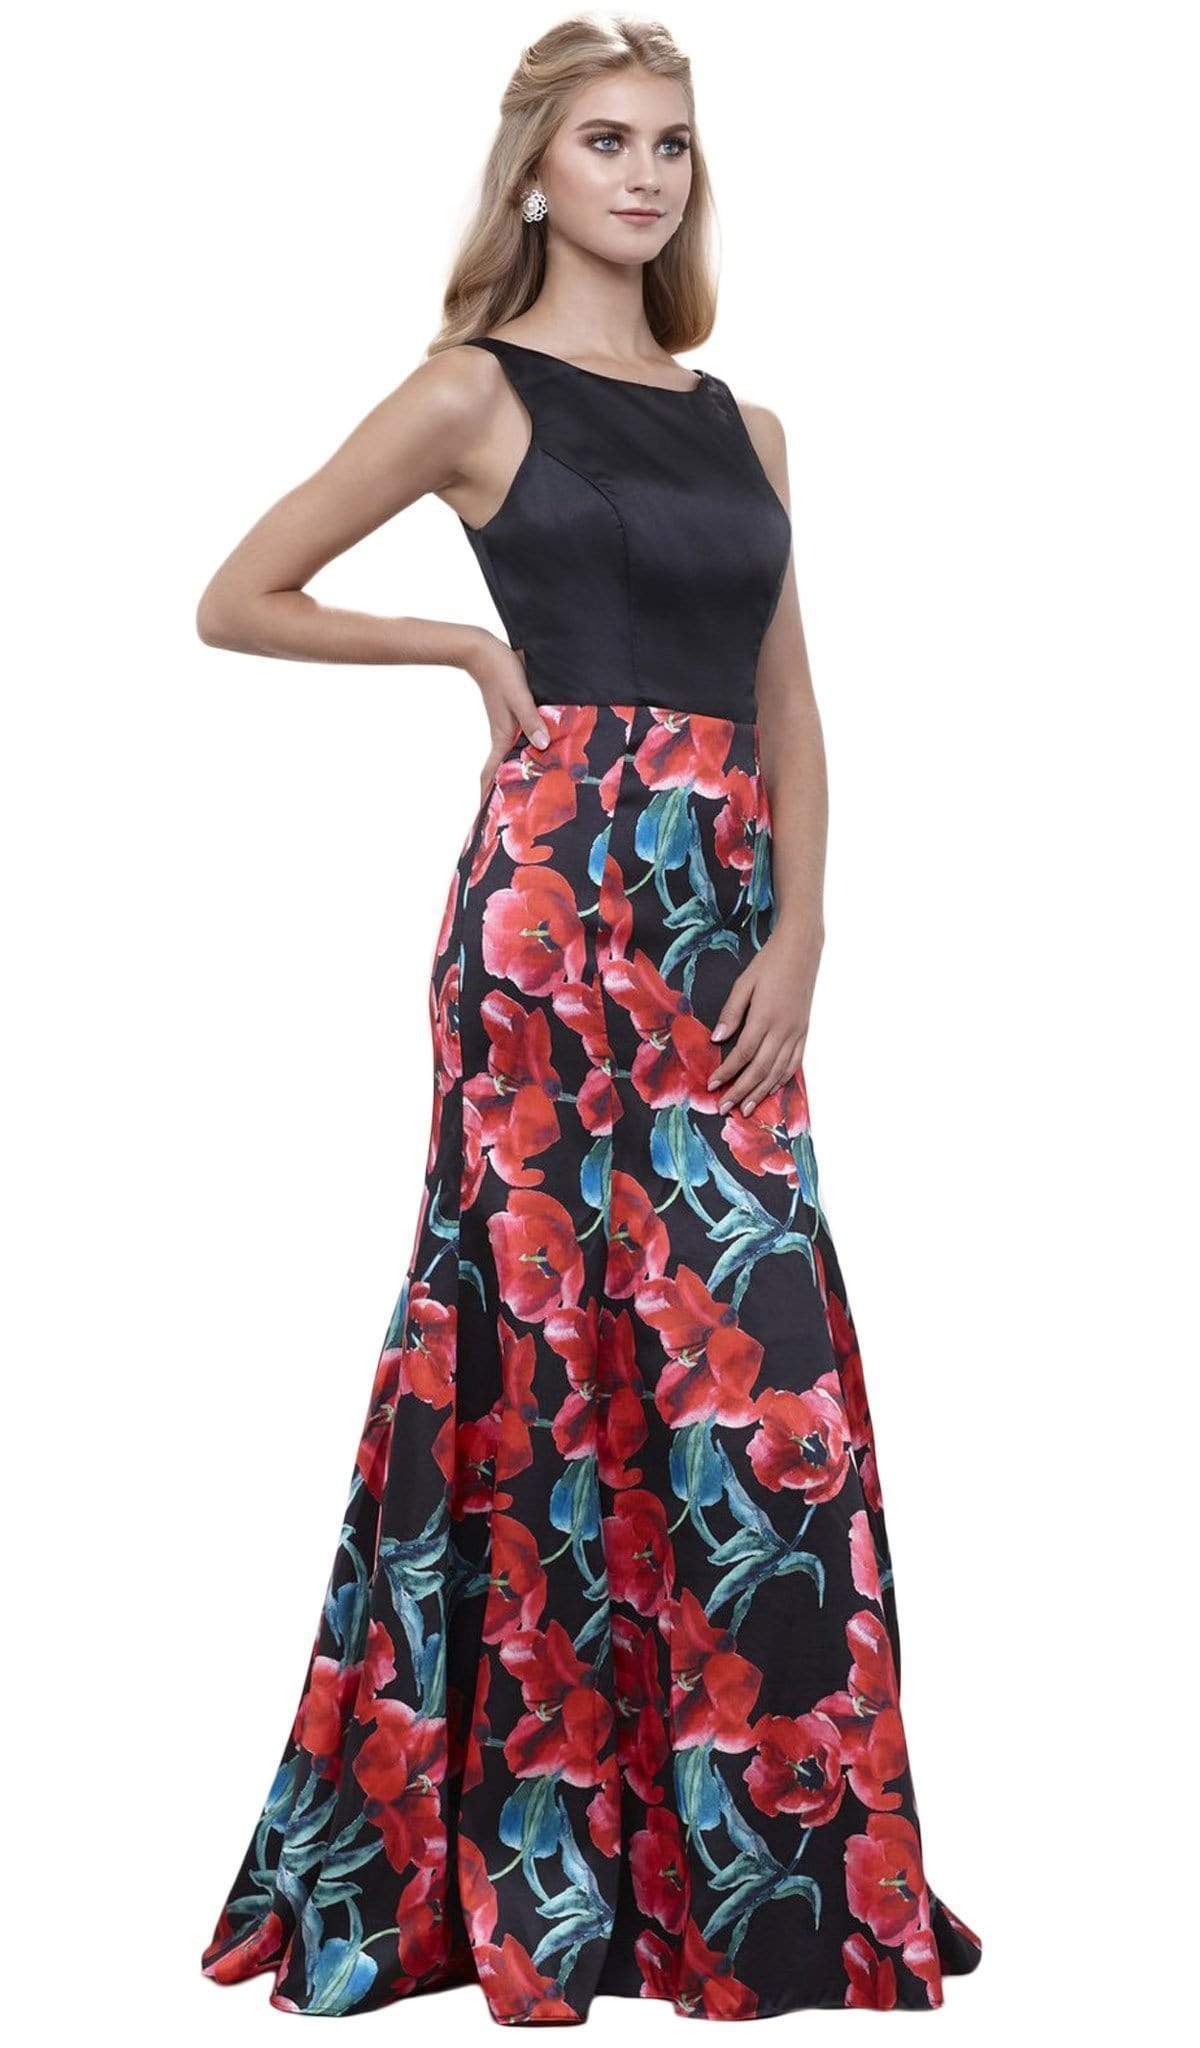 Nox Anabel - 8354 Sleeveless Floral Print Trumpet Evening Dress Special Occasion Dress XS / Floral Patterns